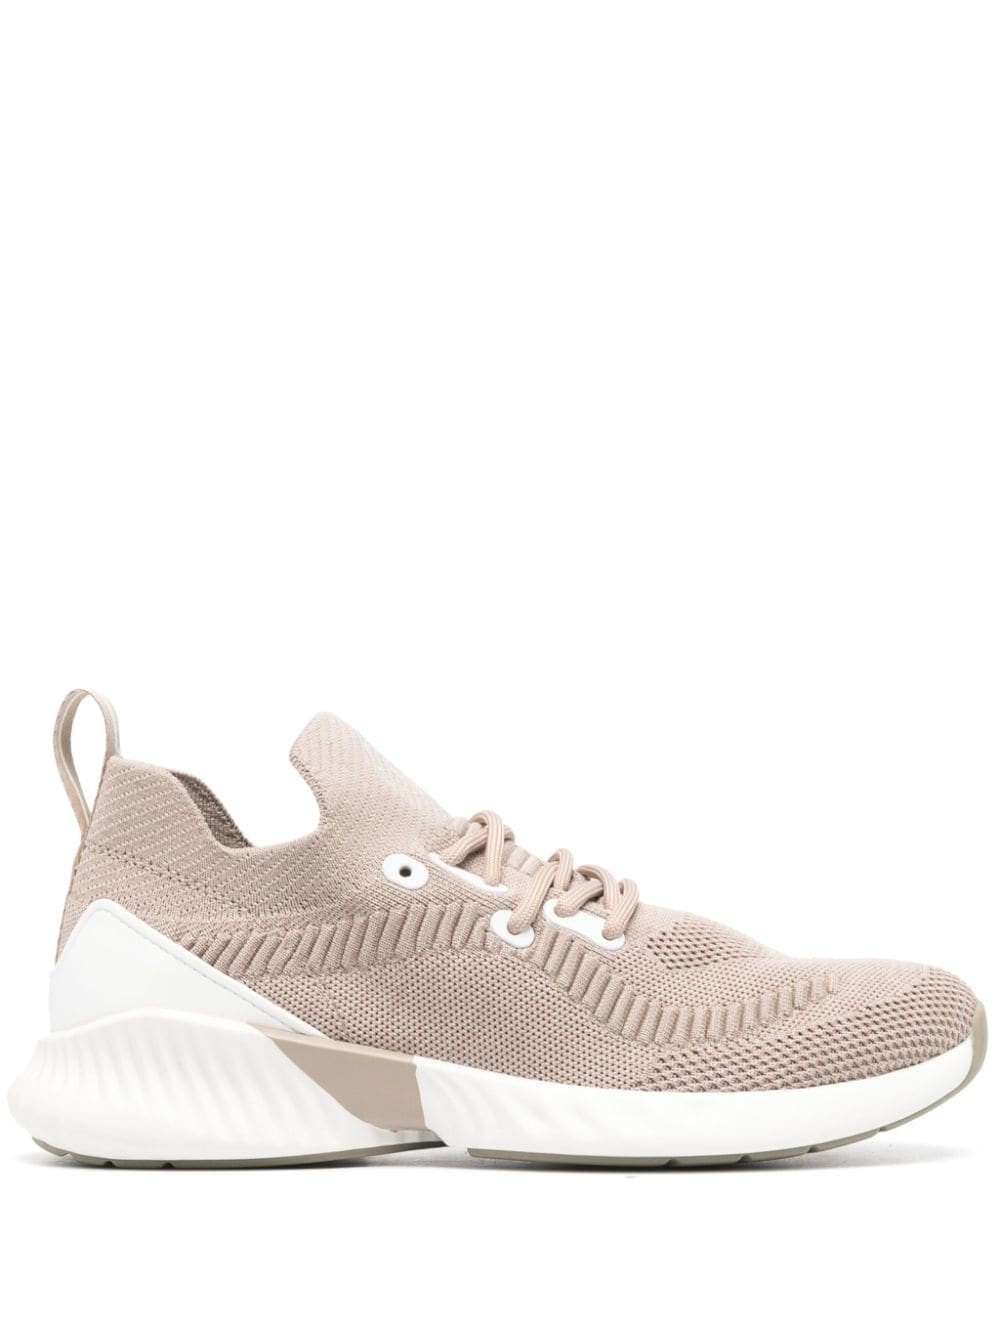 Boggi Milano Willow panelled sneakers - Nude